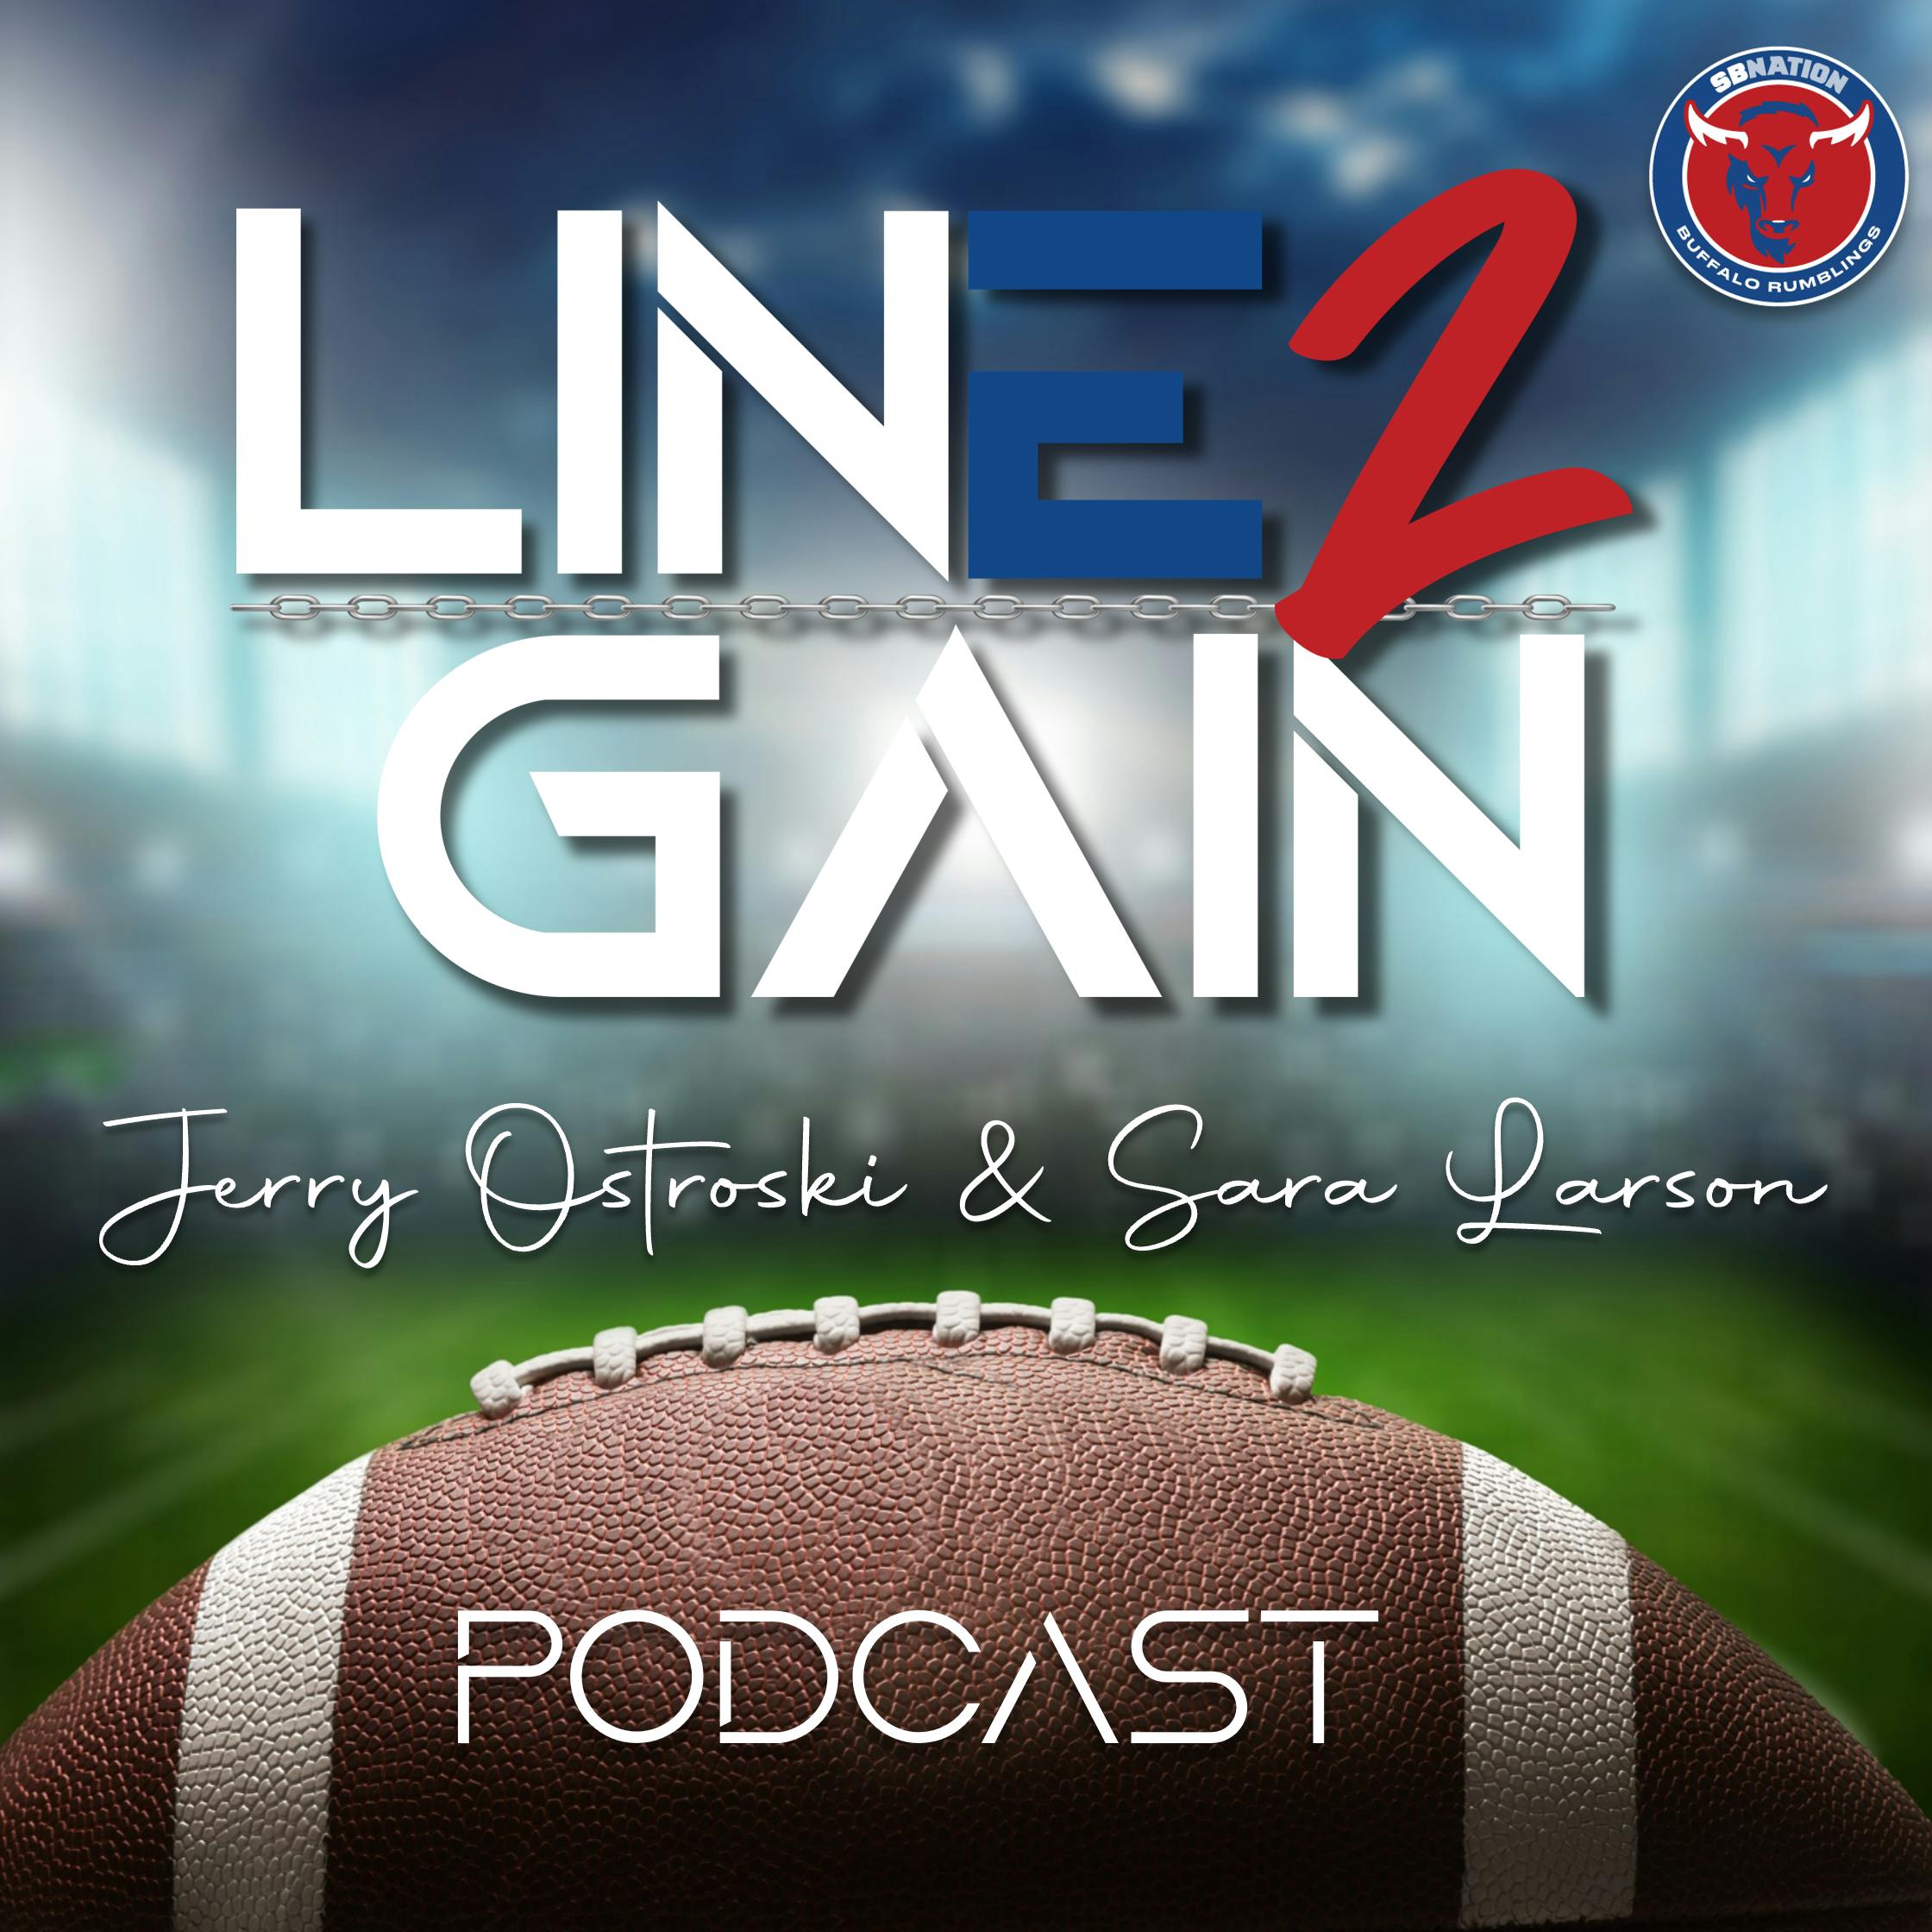 Line 2 Gain: New Name, Same Great Content